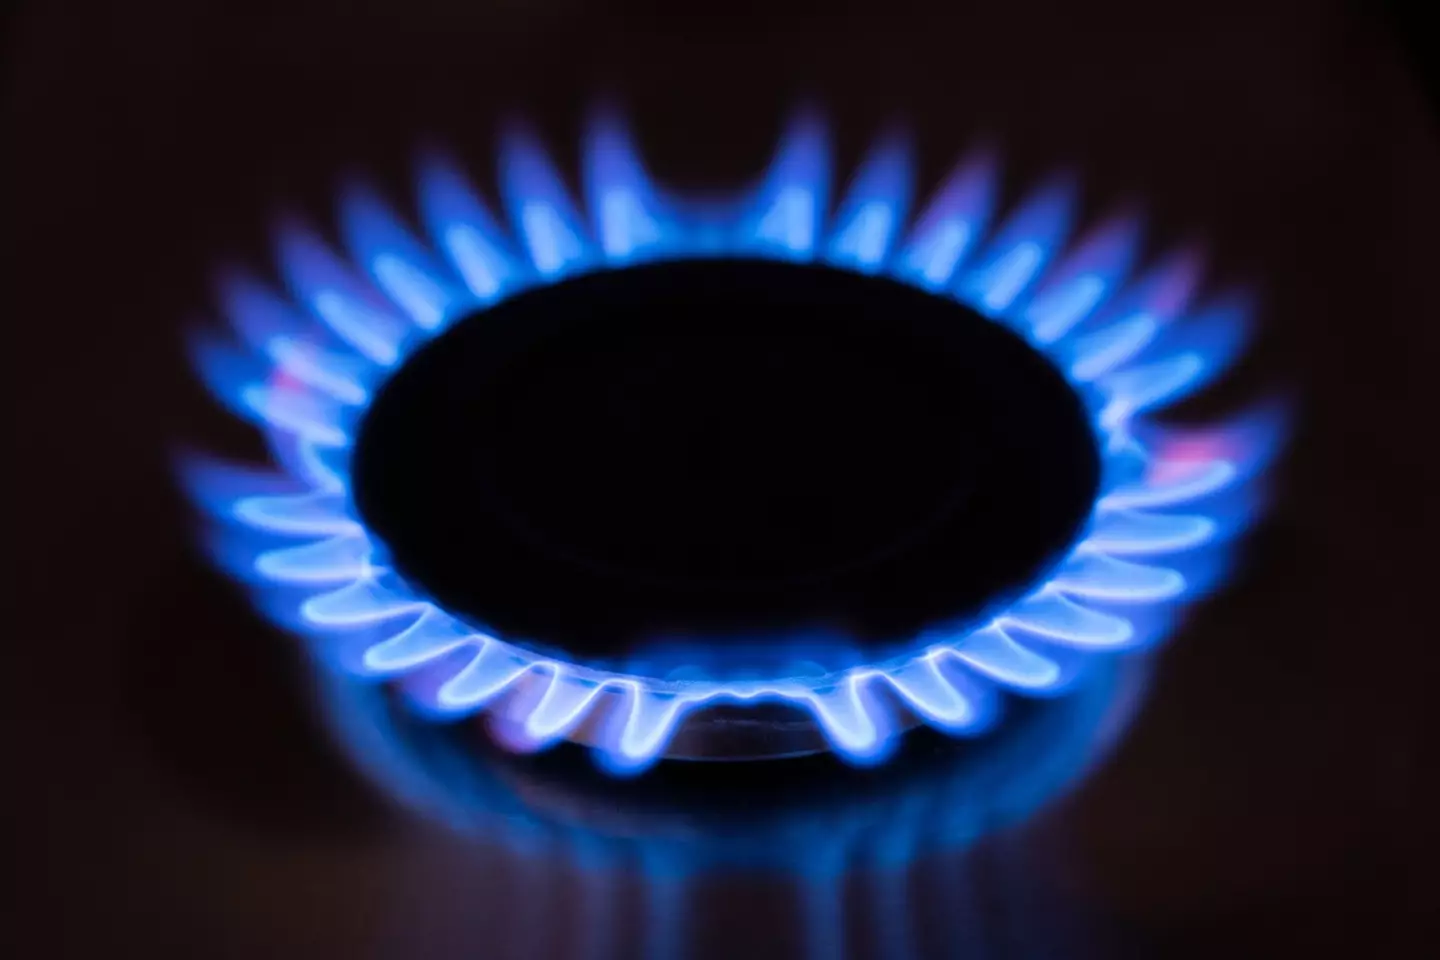 Energy prices have been capped at £2,500 for the next two years.